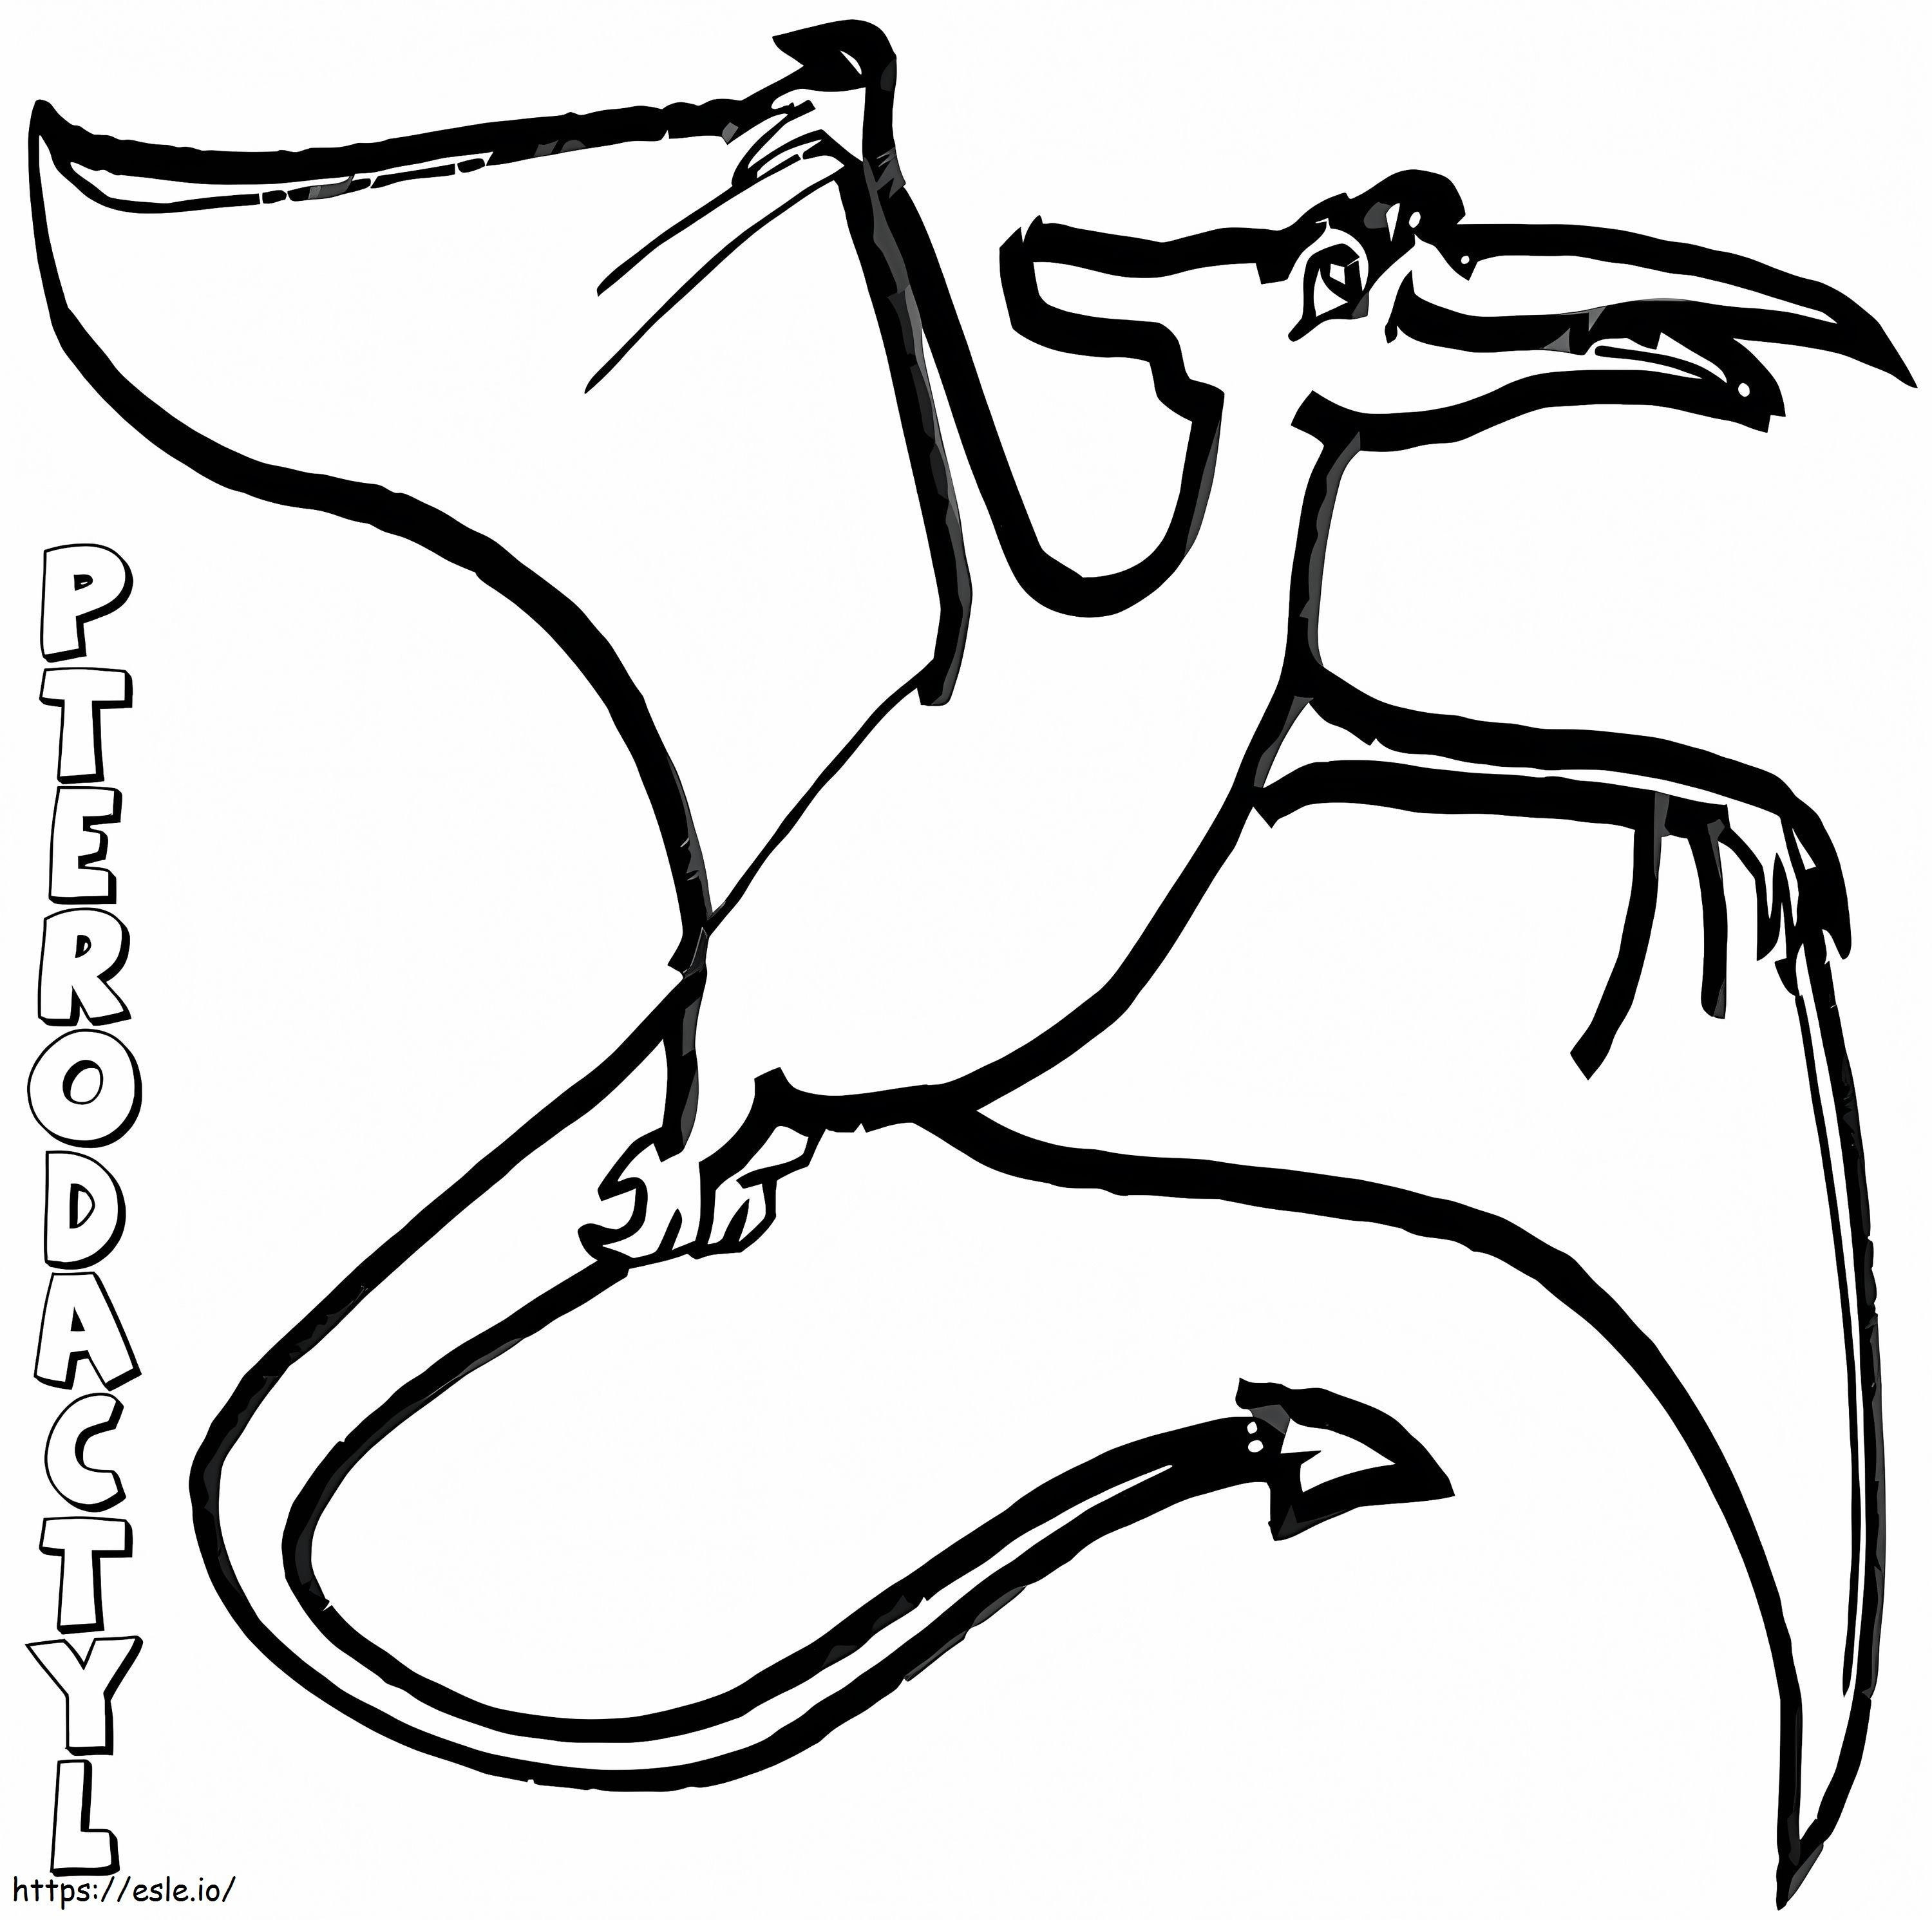 Pterodactyl 3 coloring page